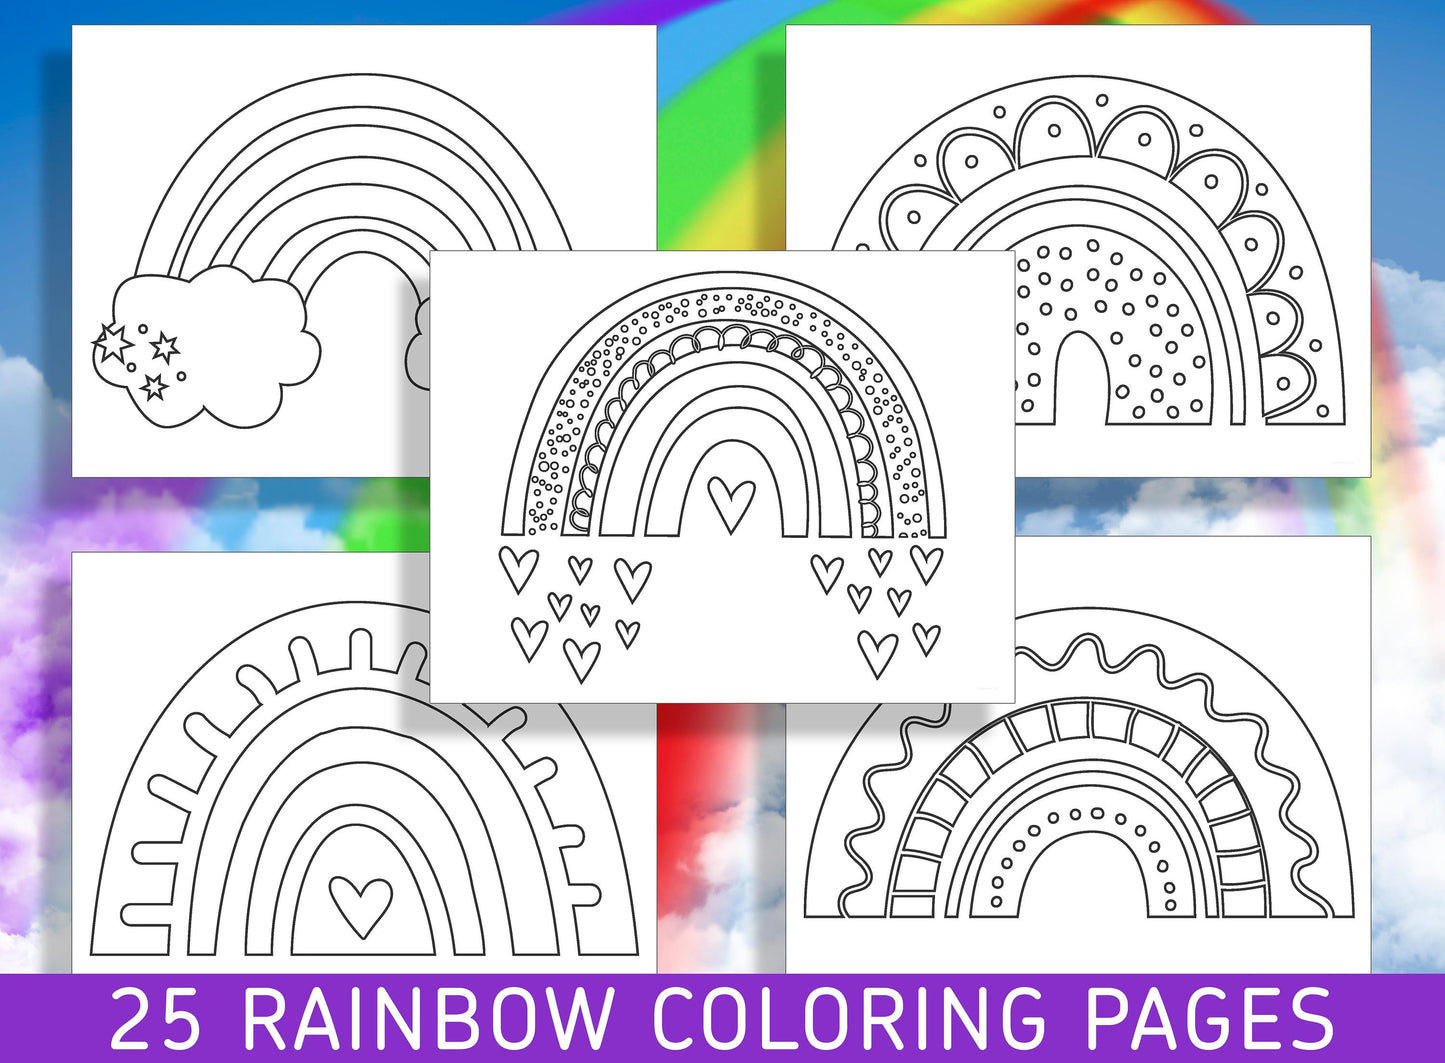 25 Delightful Rainbow Coloring Pages for Preschool and Kindergarten, PDF File, Instant Download